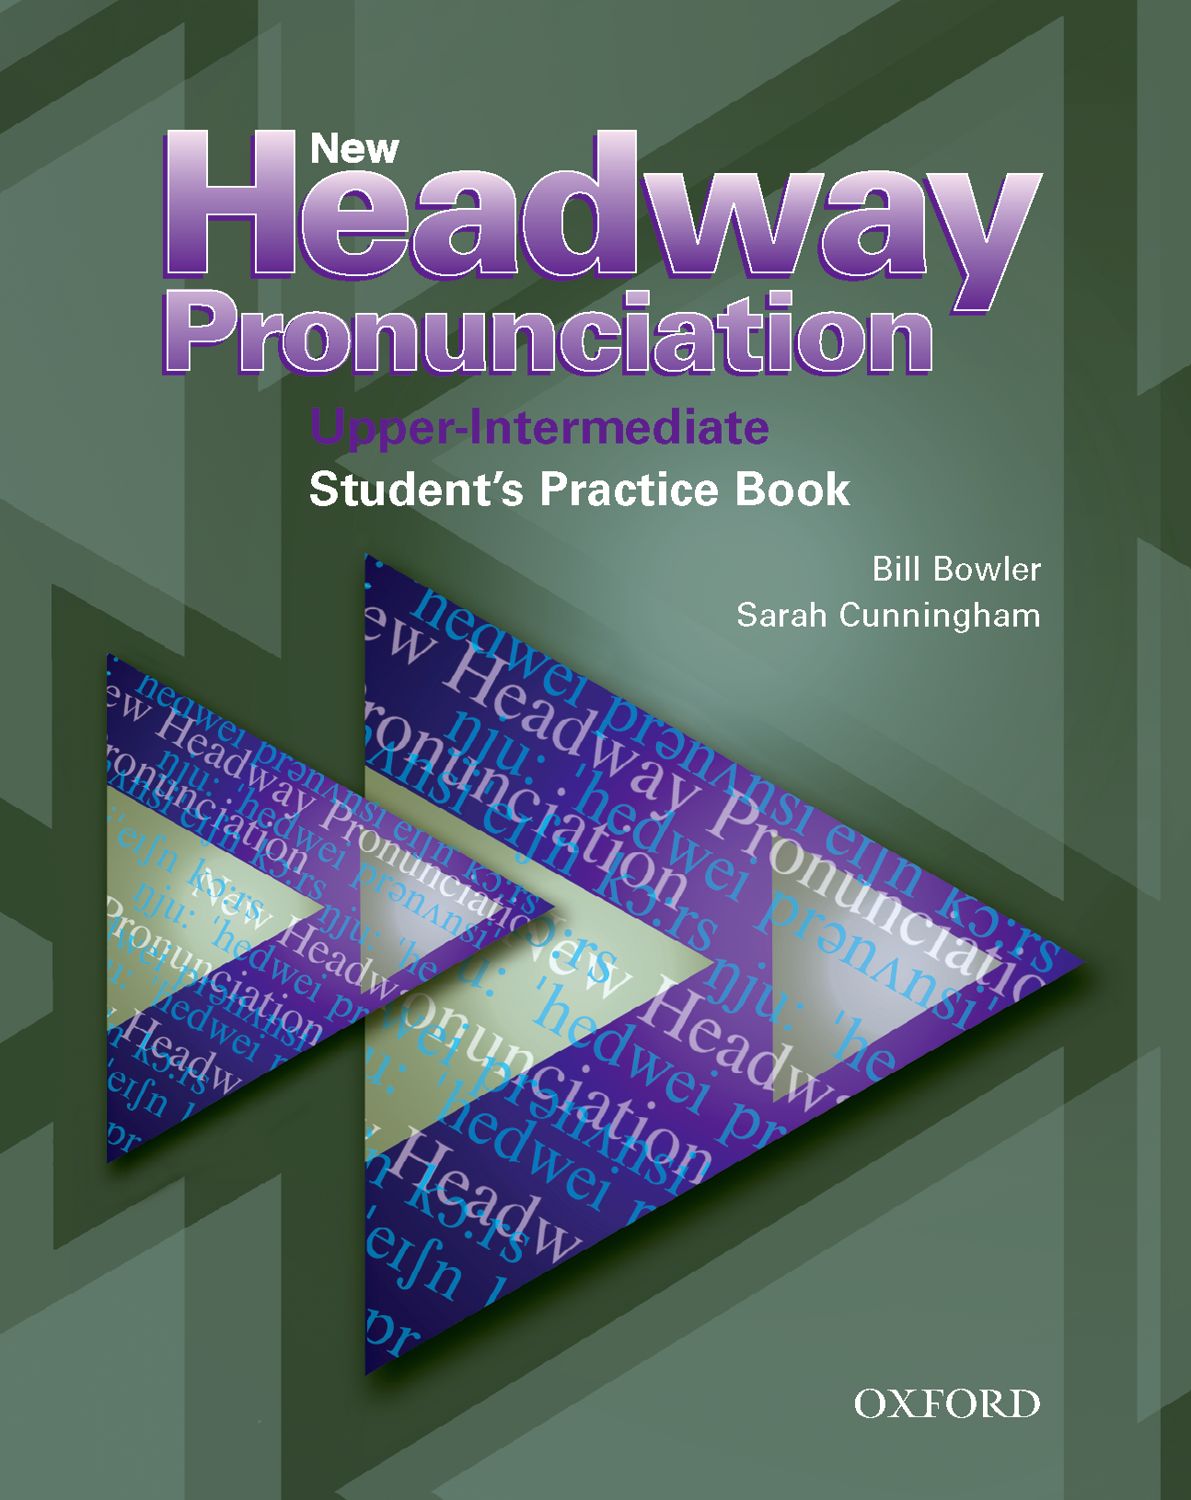 New headway upper. New Headway pronunciation course -Intermediate ,Oxford. New Headway Intermediate. New Headway Upper Intermediate. New Headway pronunciation course.